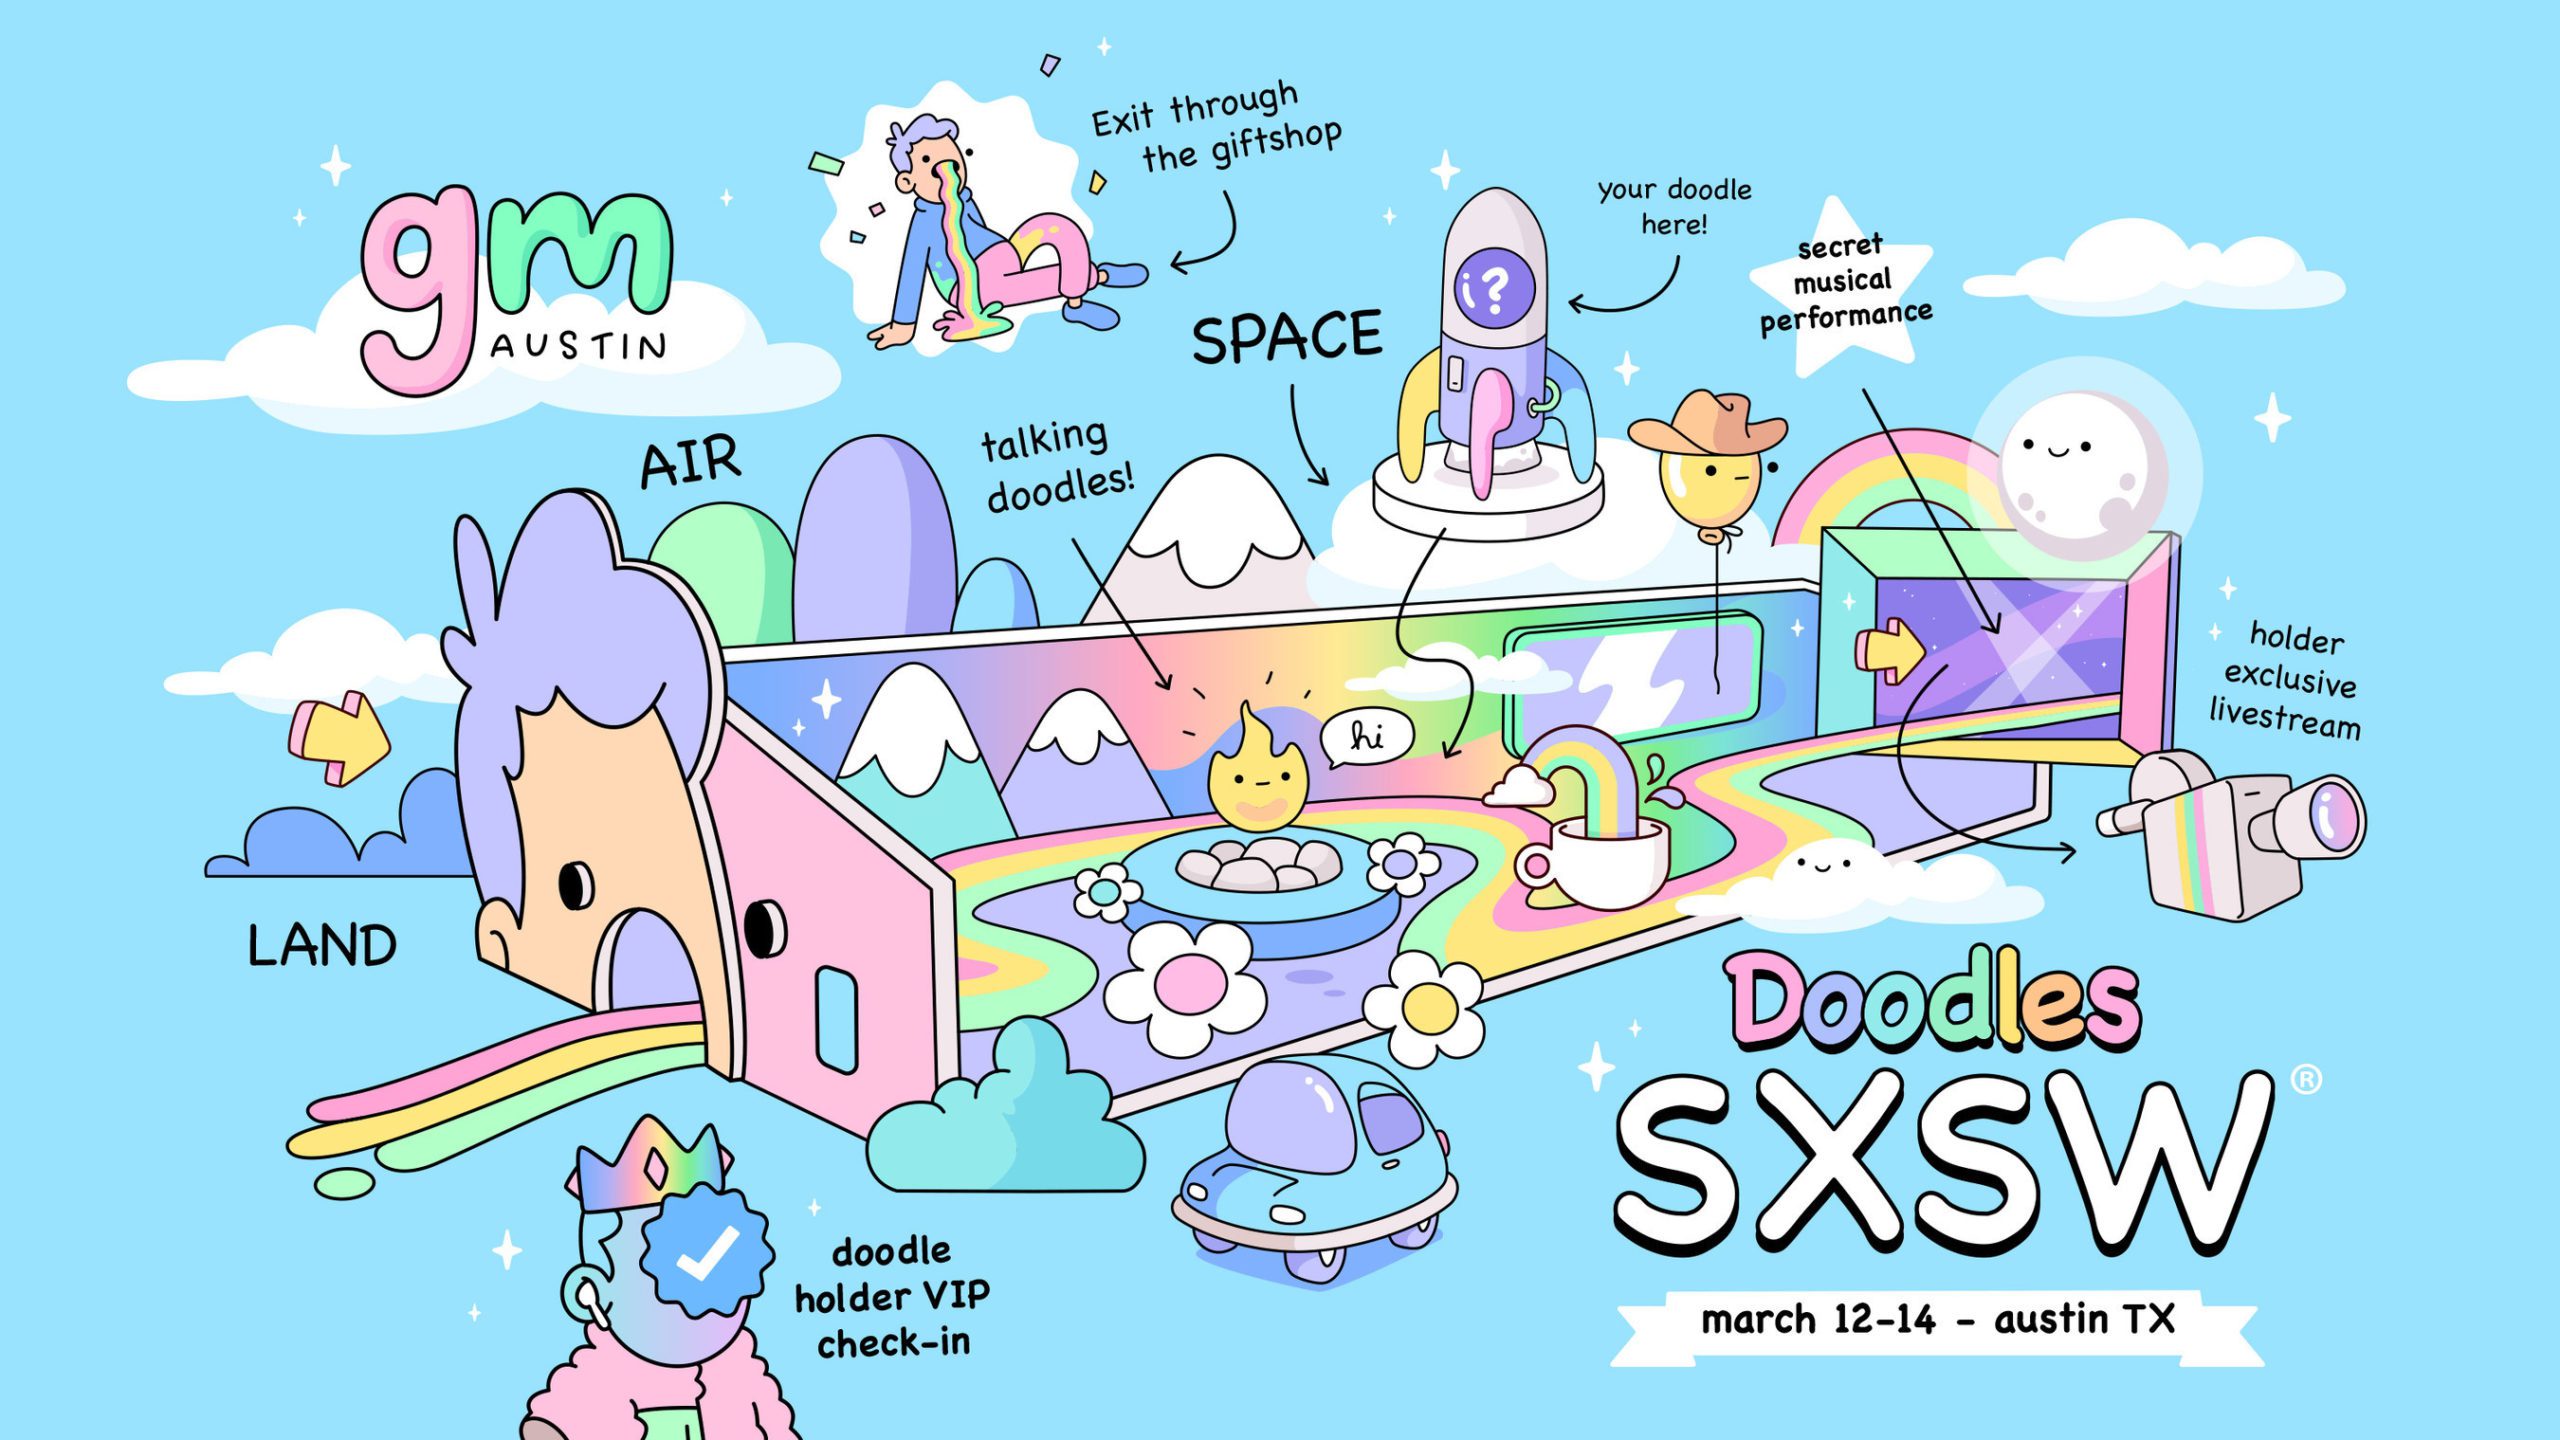 Behr is helping bring Doodles’ iconic colors to life in a one-of-a-kind immersive experience at the SXSW festival